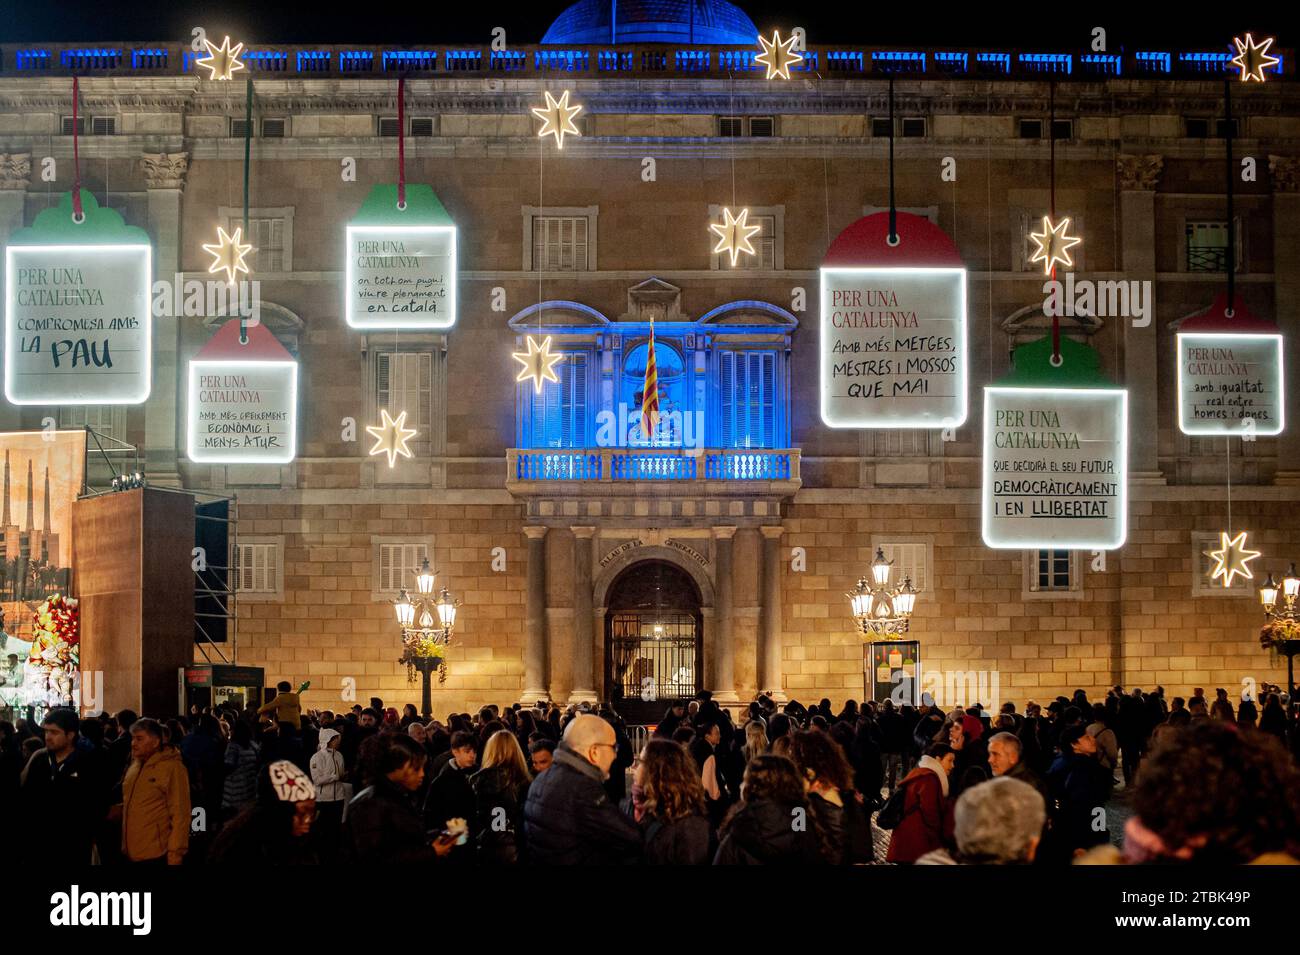 People visit downtown Barcelona where the main facade of the Catalan government headquarters (Generalitat de Catalunya) appears decorated with lights and Christmas motifs. Stock Photo